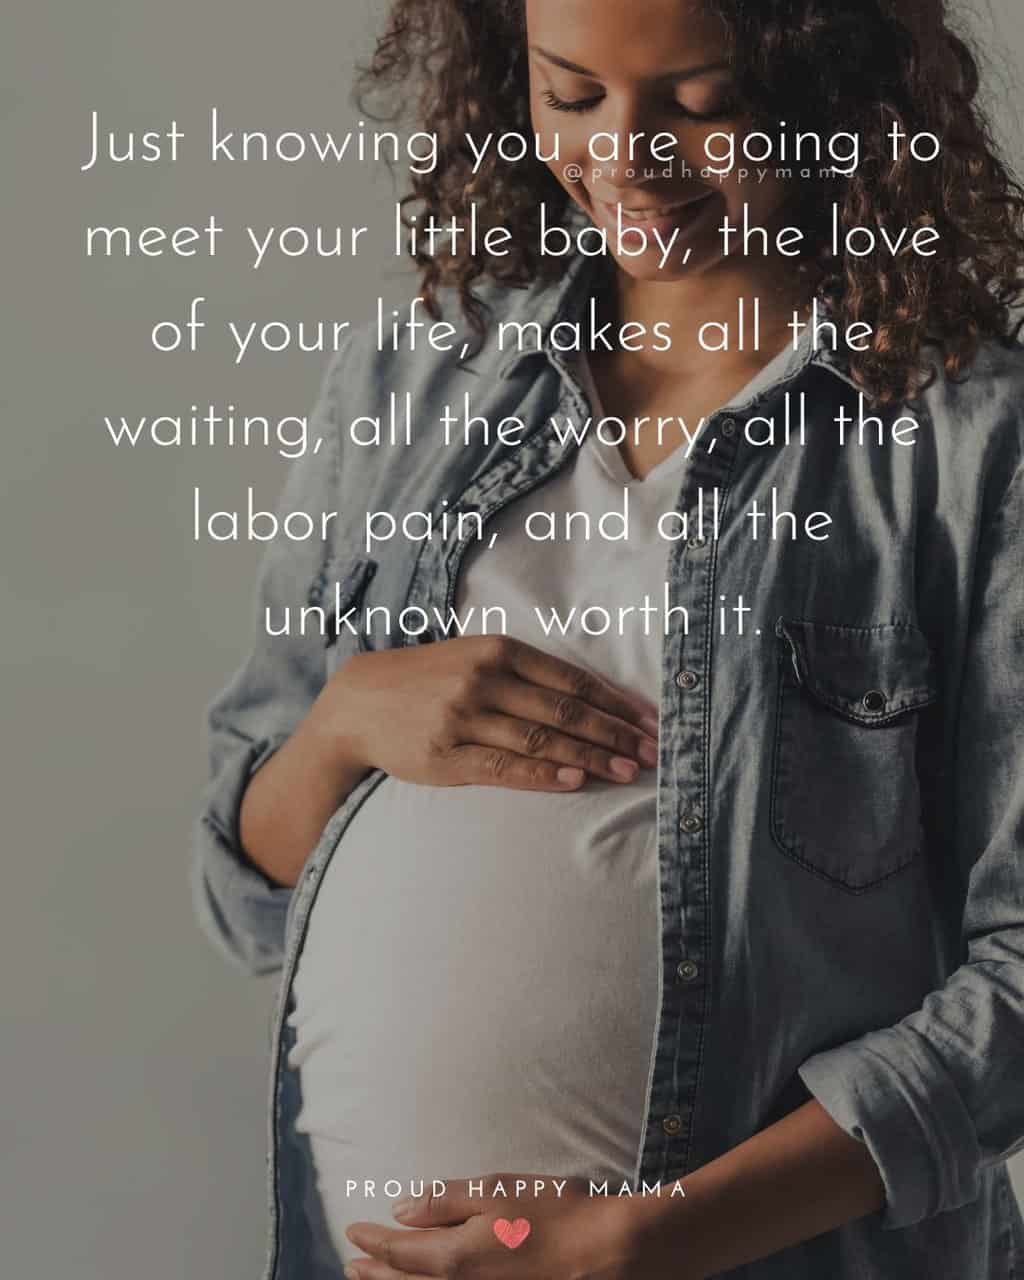 Pregnant Mom Quotes | Just knowing you are going to meet your little baby, the love of your life, makes all the waiting, all the worry, all the labor pain, and all the unknown worth it.